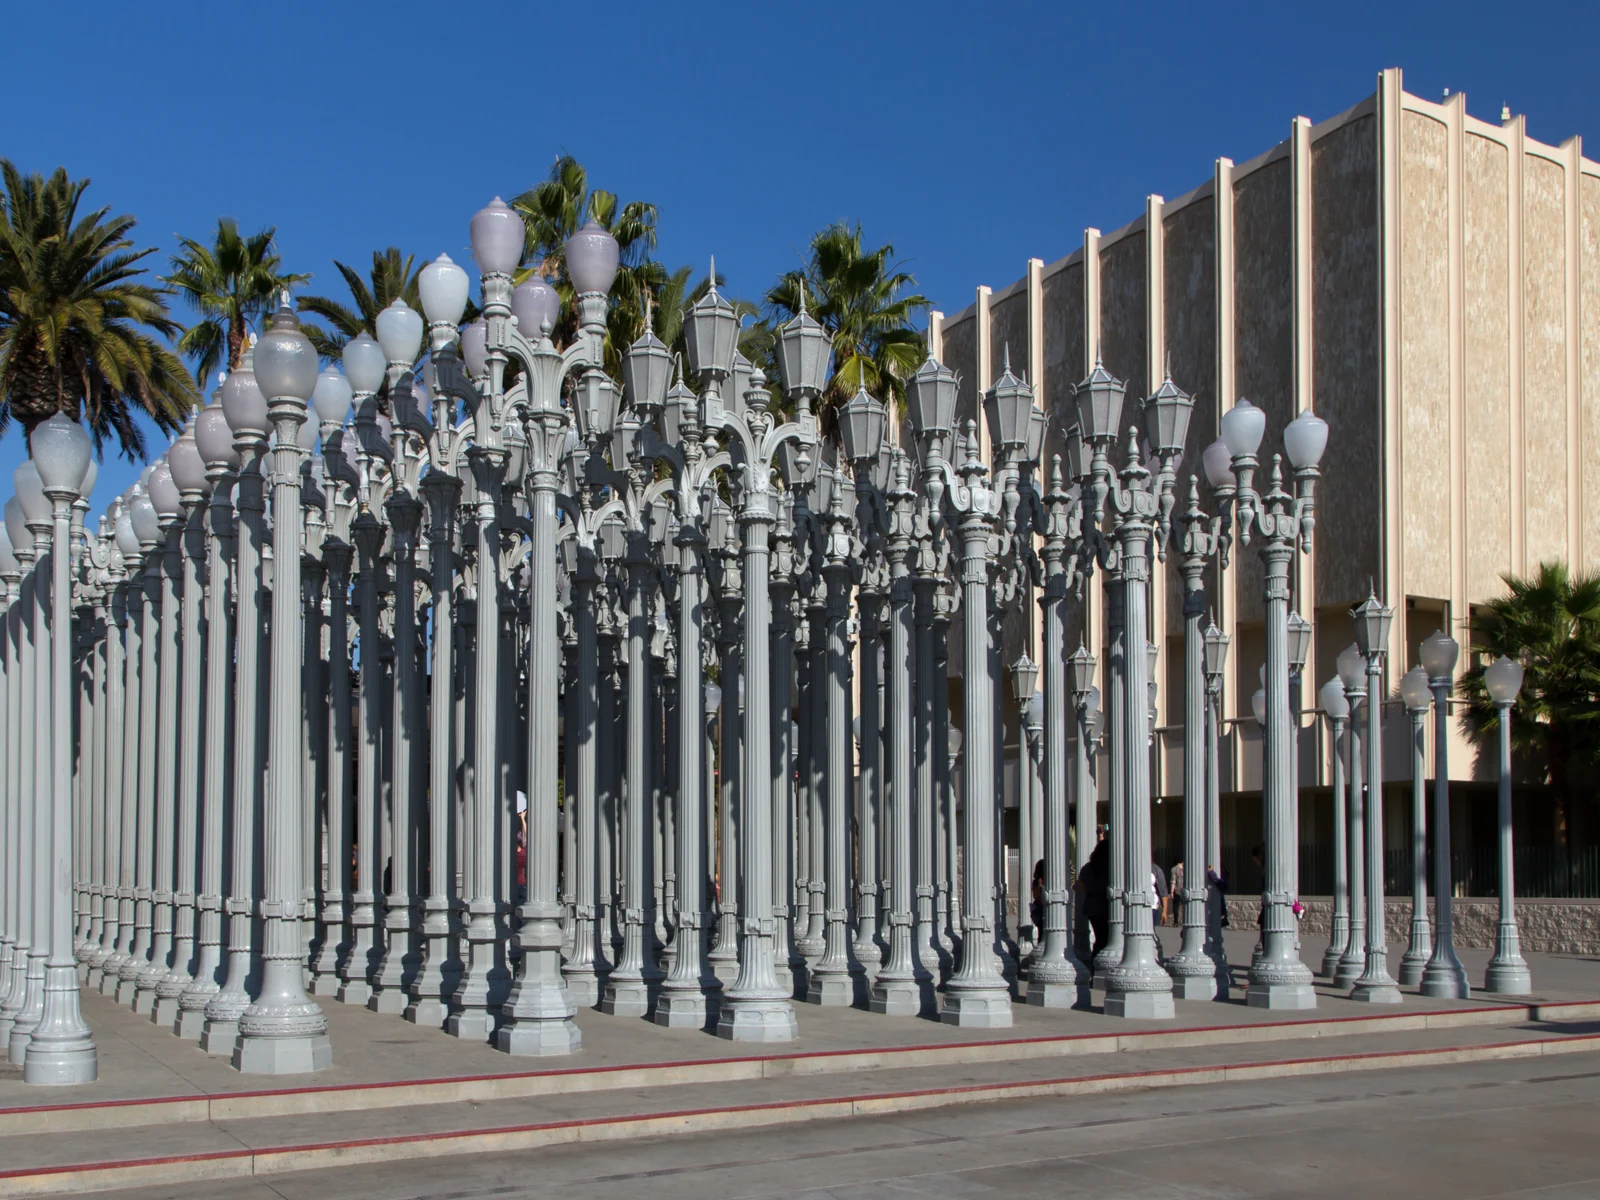 One of the top things to do in Los Angeles, the Los Angeles County Museum of Art, as viewed from the street